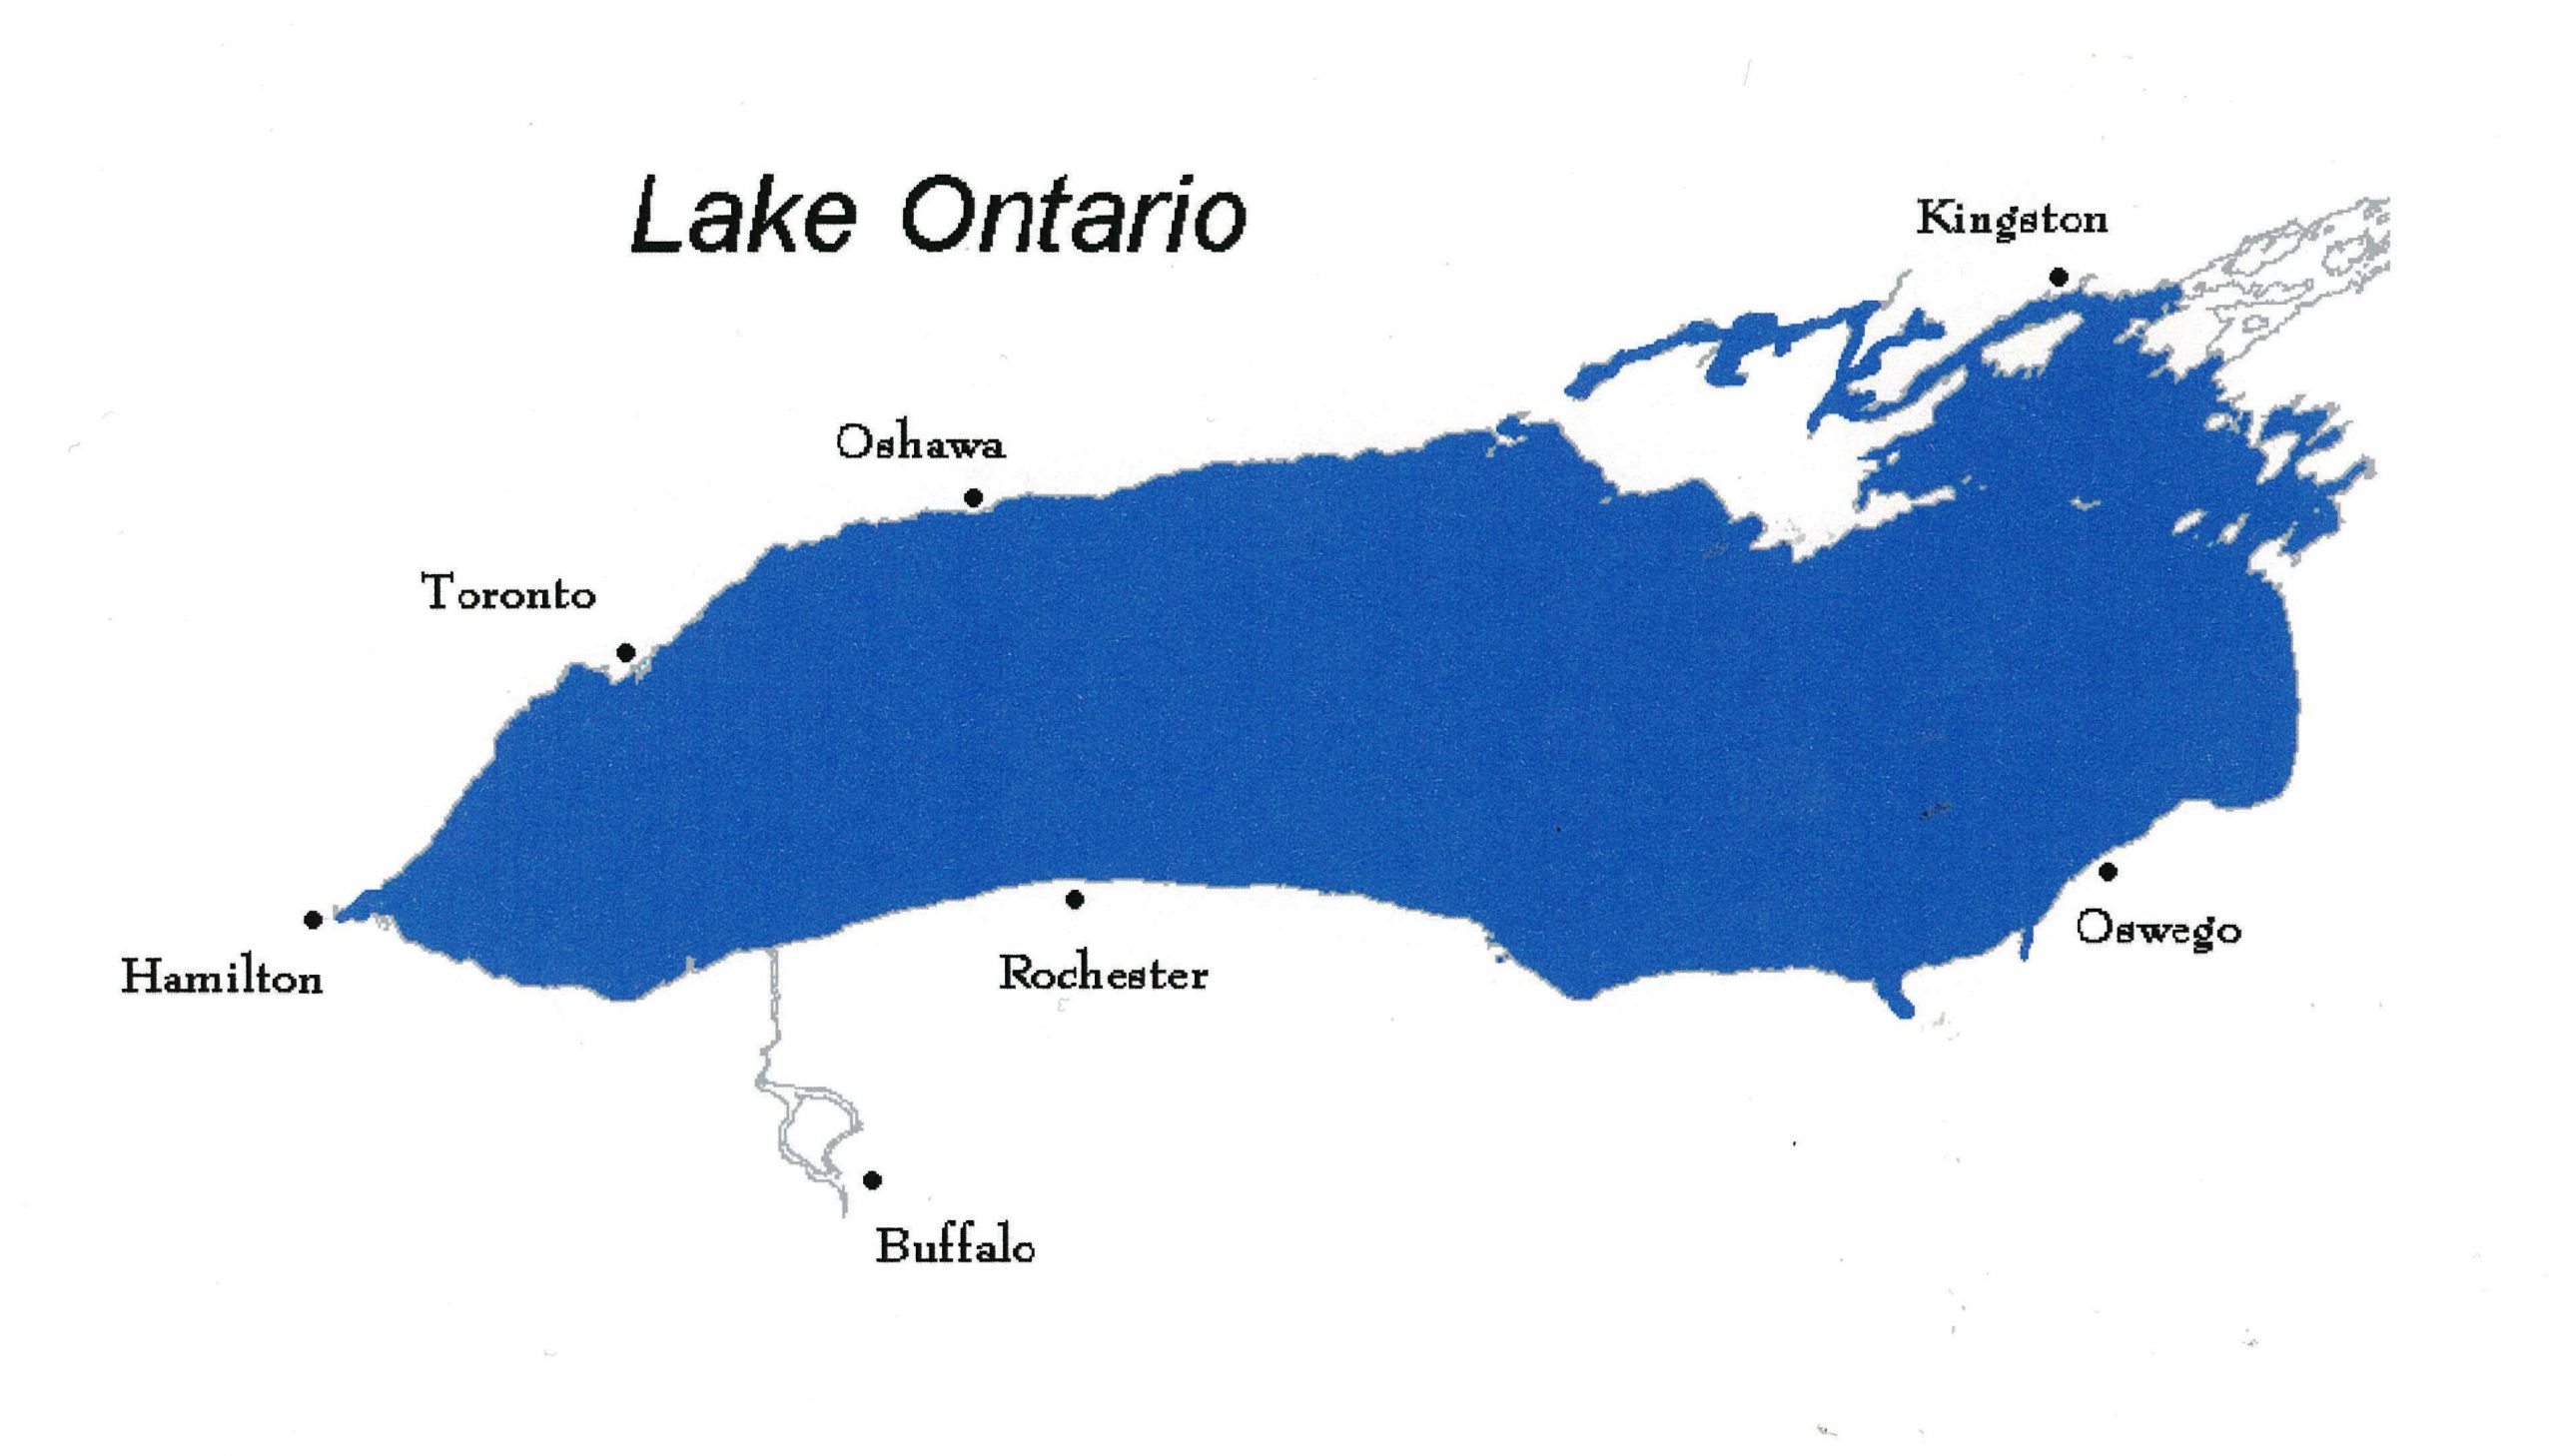 Hand drawn colour map of Lake Ontario showing locations of ports.